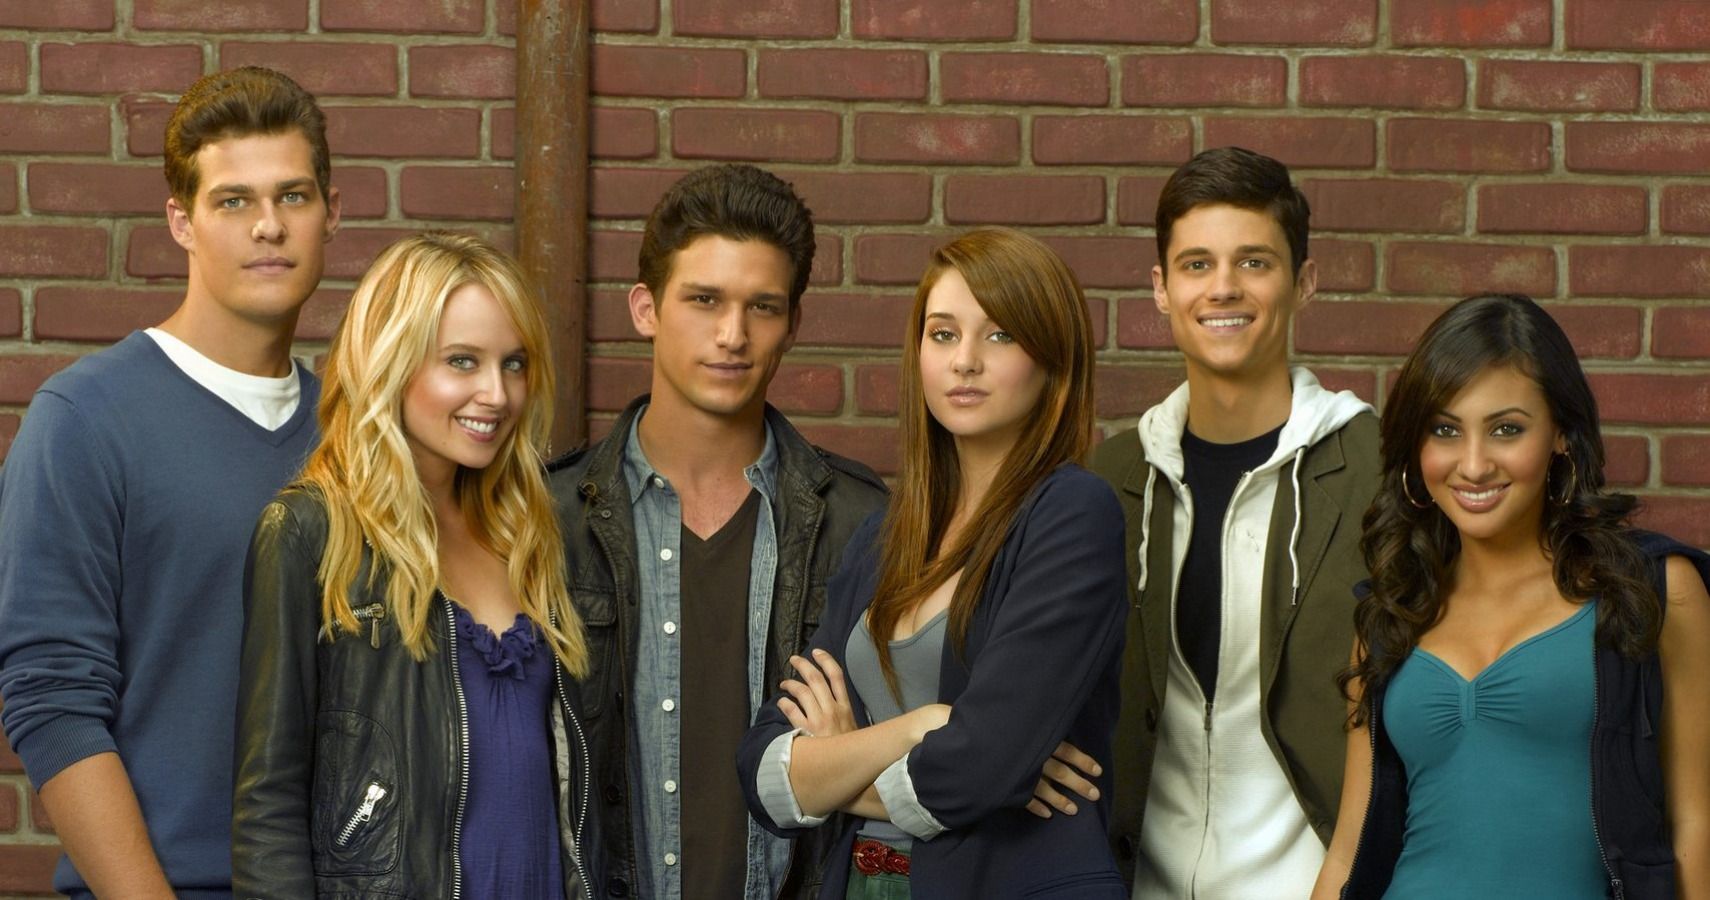 10 Best Episodes Of The Secret Life Of The American Teenager, According To  IMDb